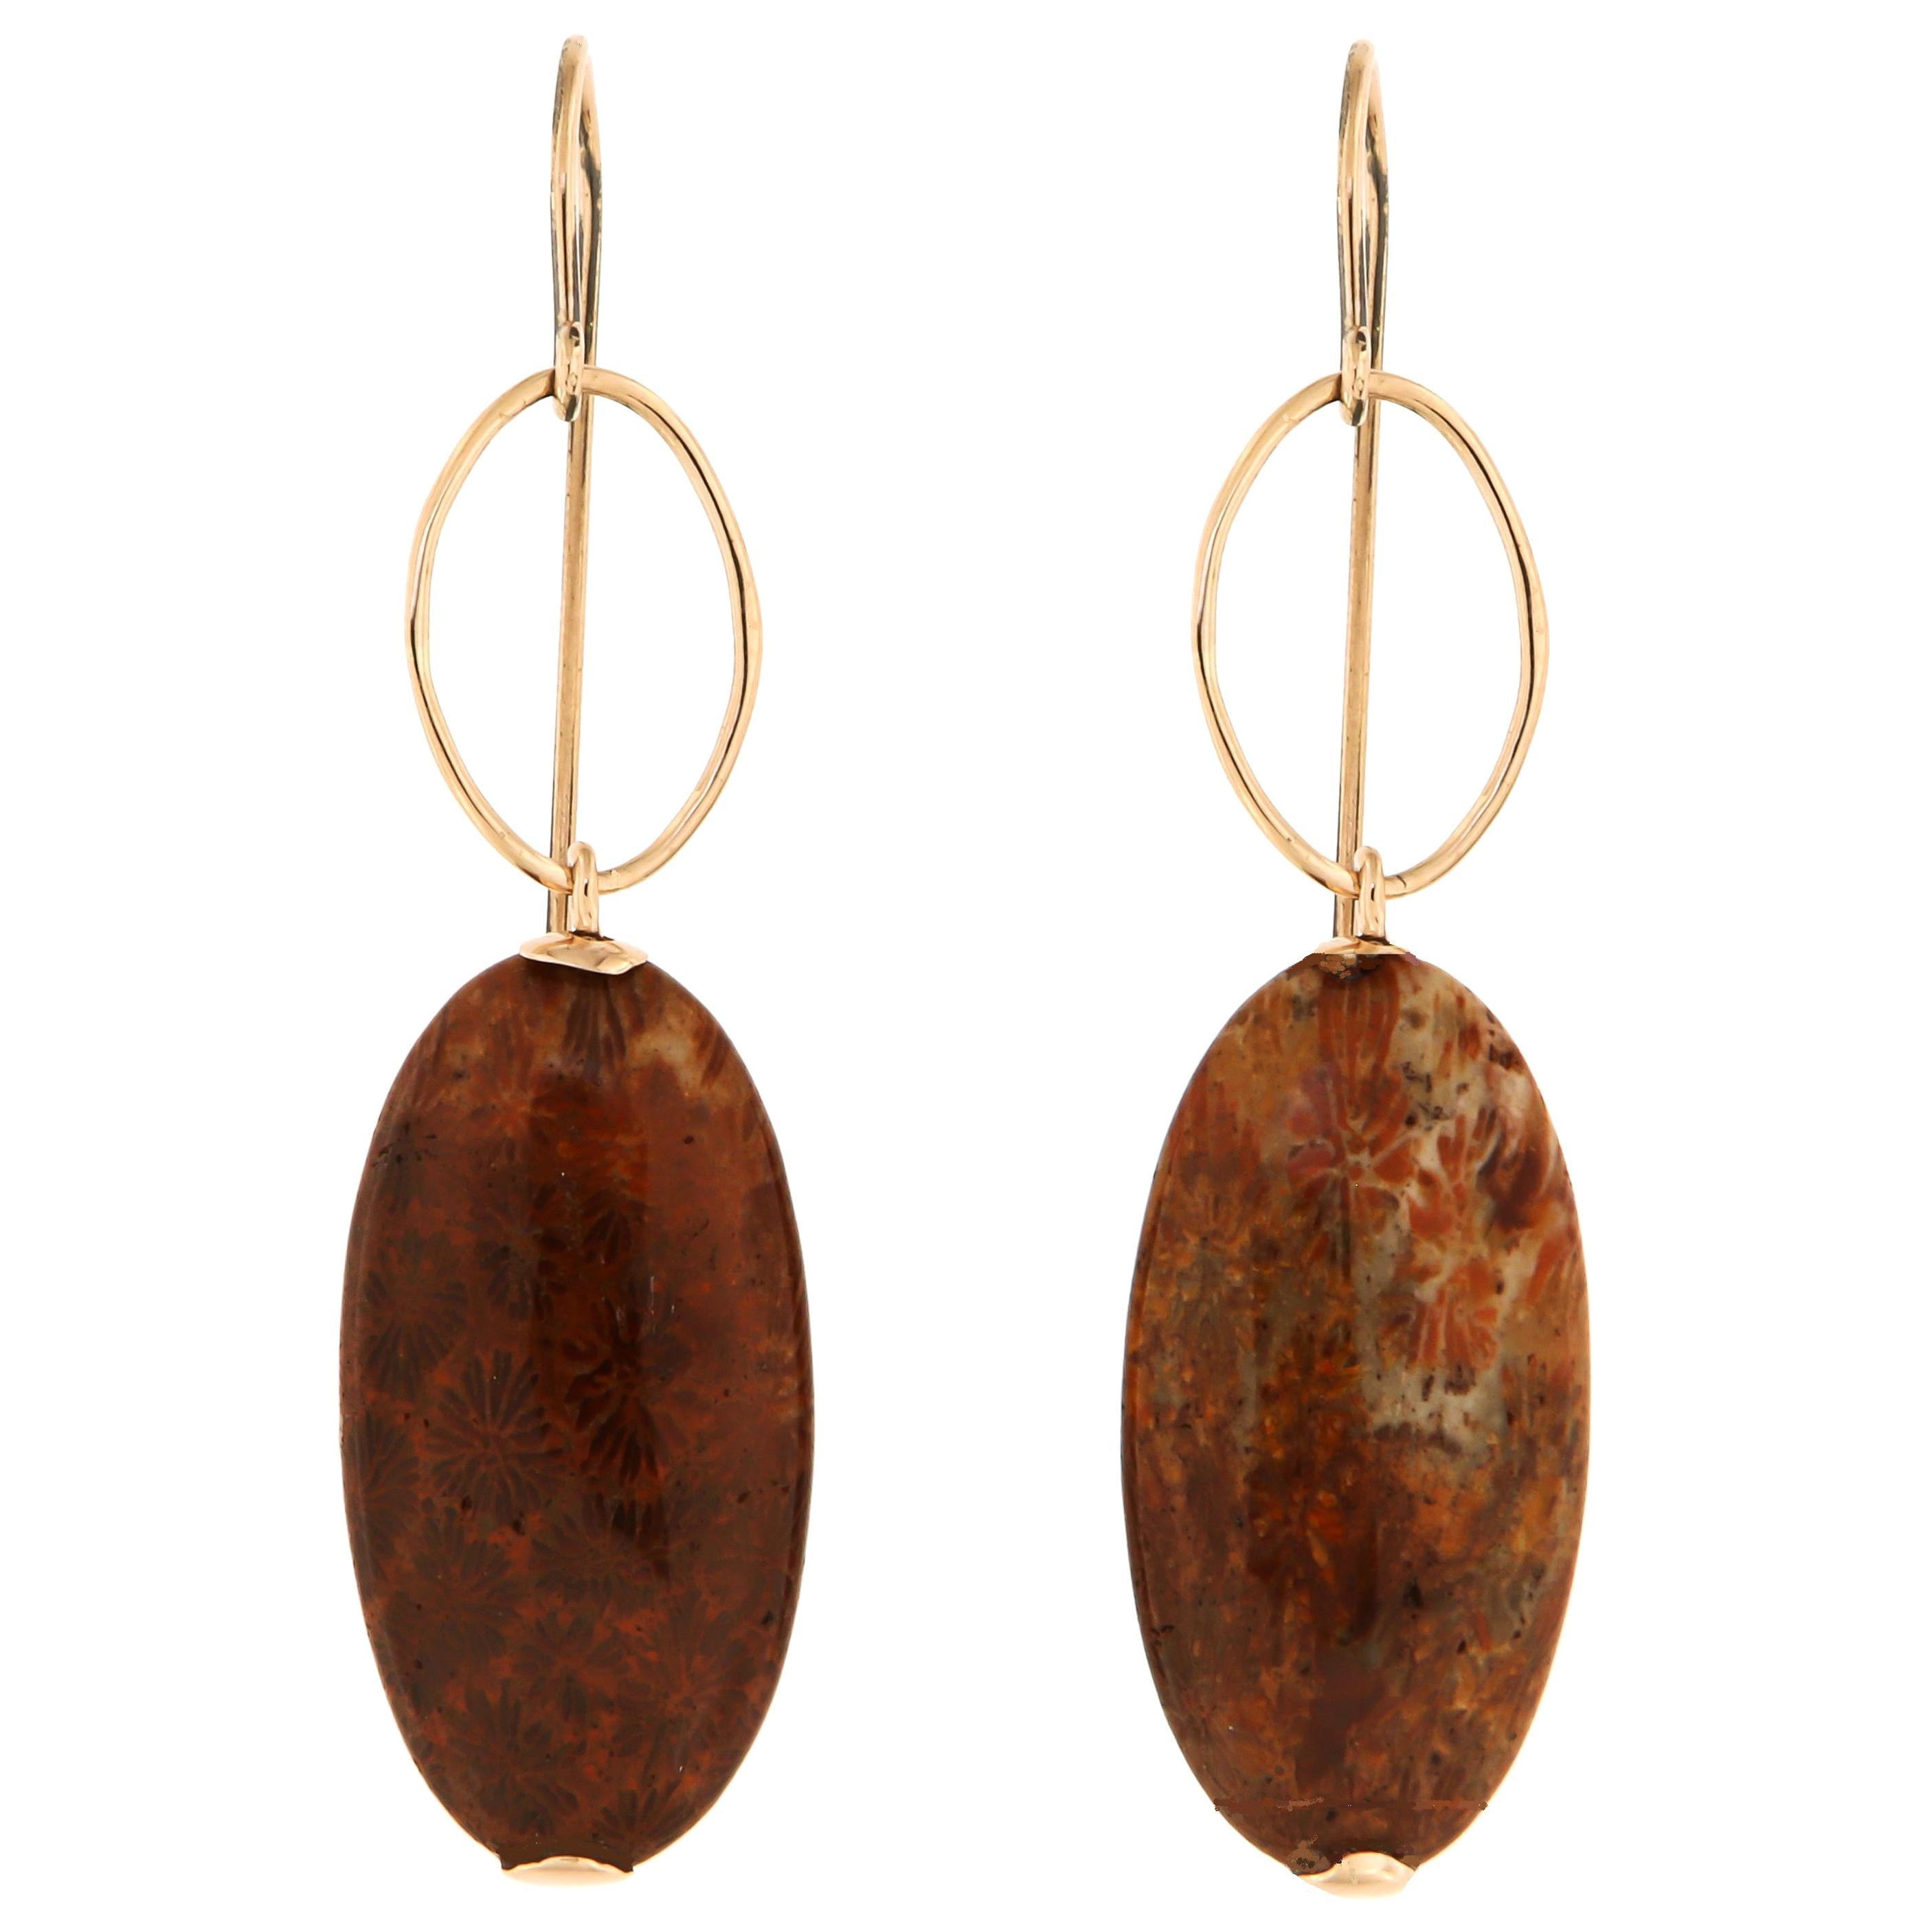 Dendritic Agate Rose Gold Earrings Handcrafted in Italy by Botta Gioielli